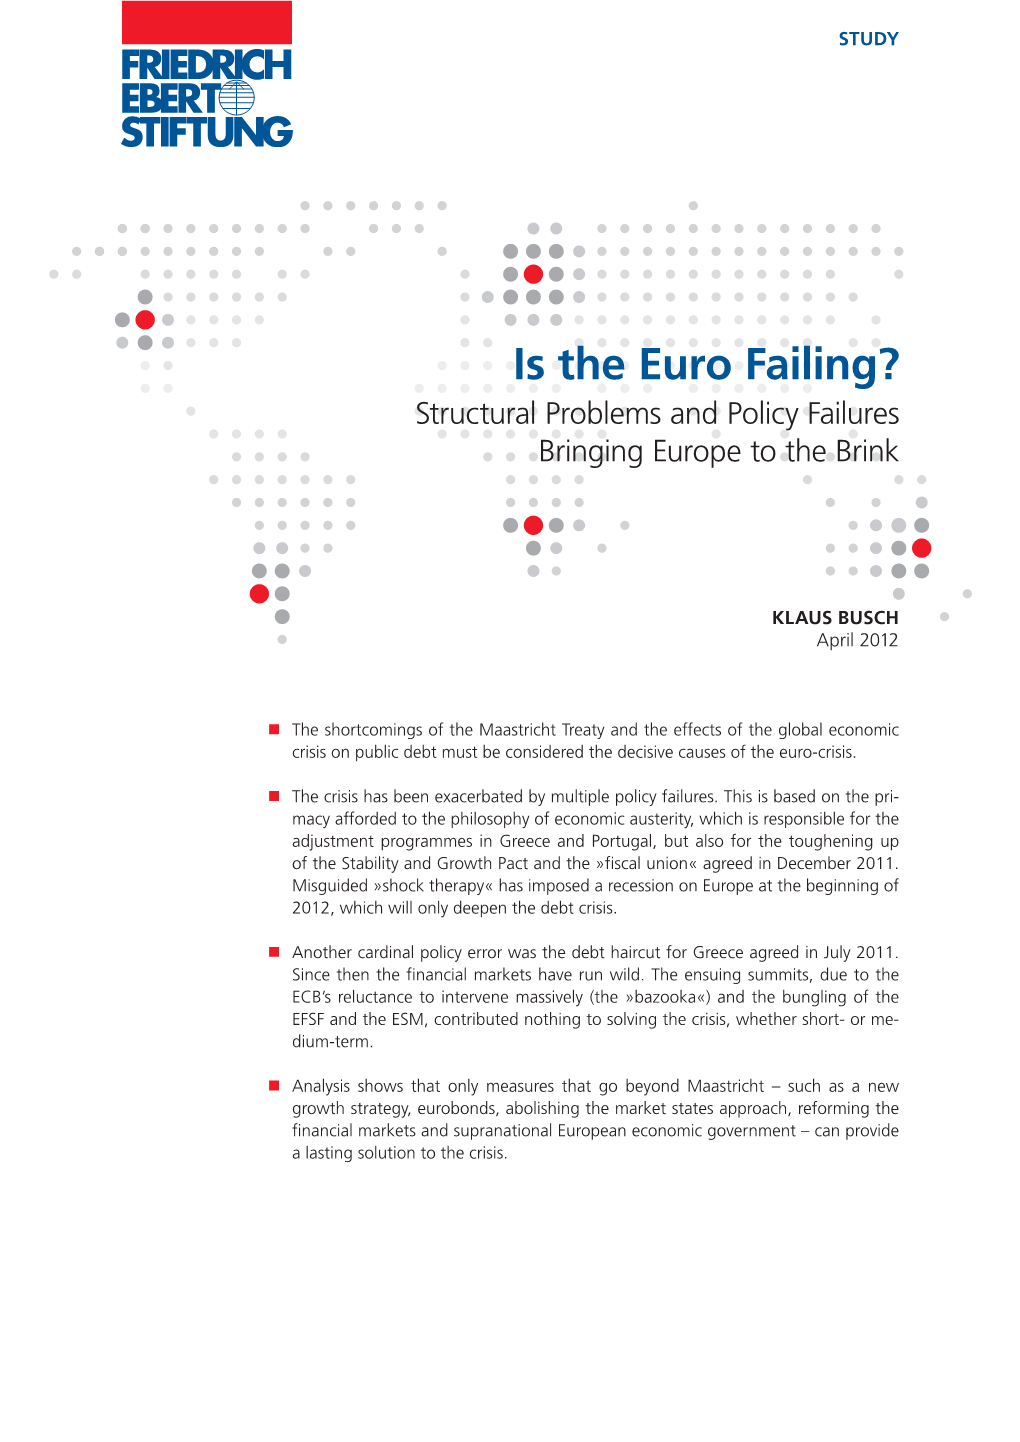 Is the Euro Failing? Structural Problems and Policy Failures Bringing Europe to the Brink